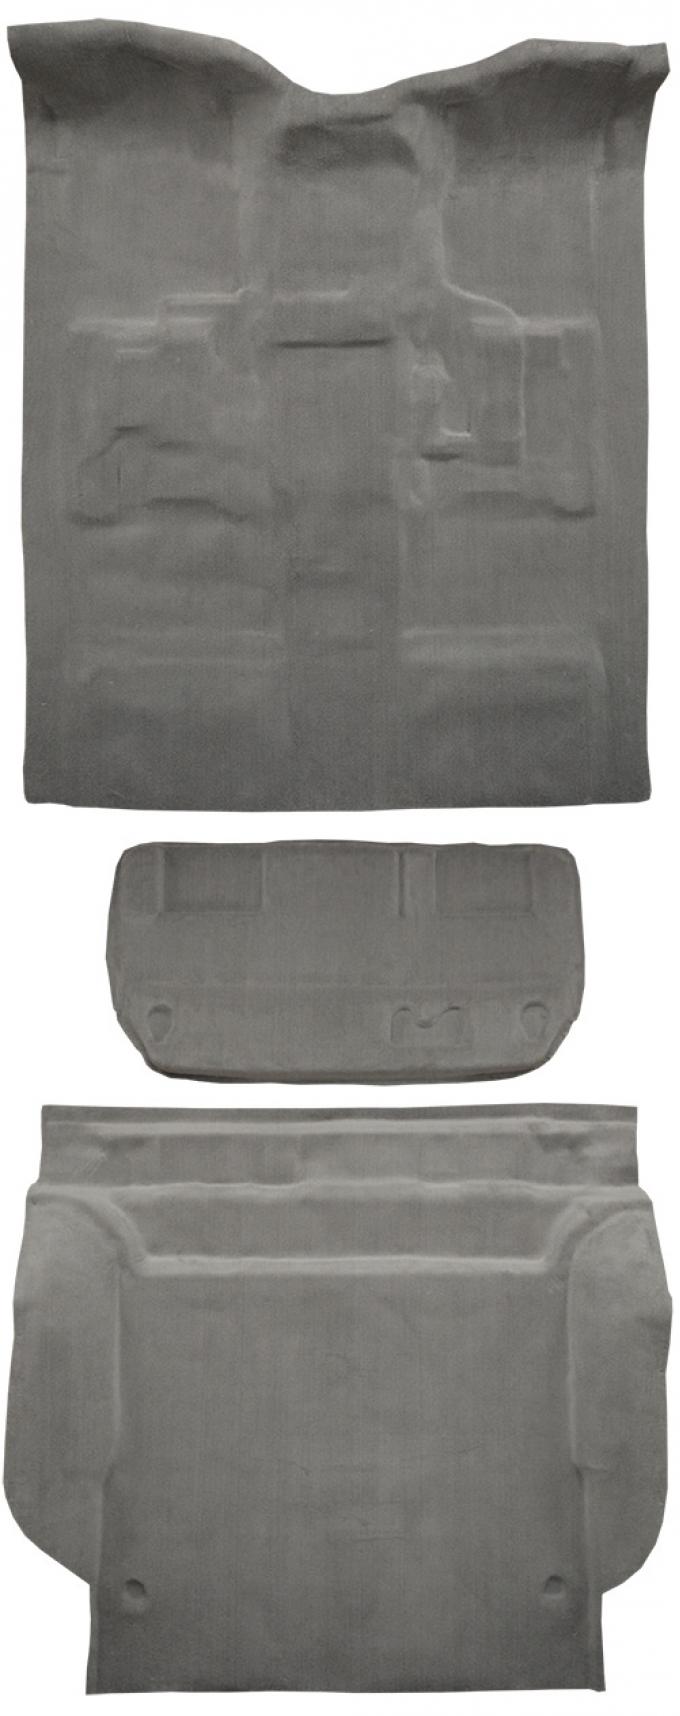 ACC 2007-2010 Cadillac Escalade 4DR w/2nd Row 60-40 Seat Mount Cover Complete Cutpile Carpet